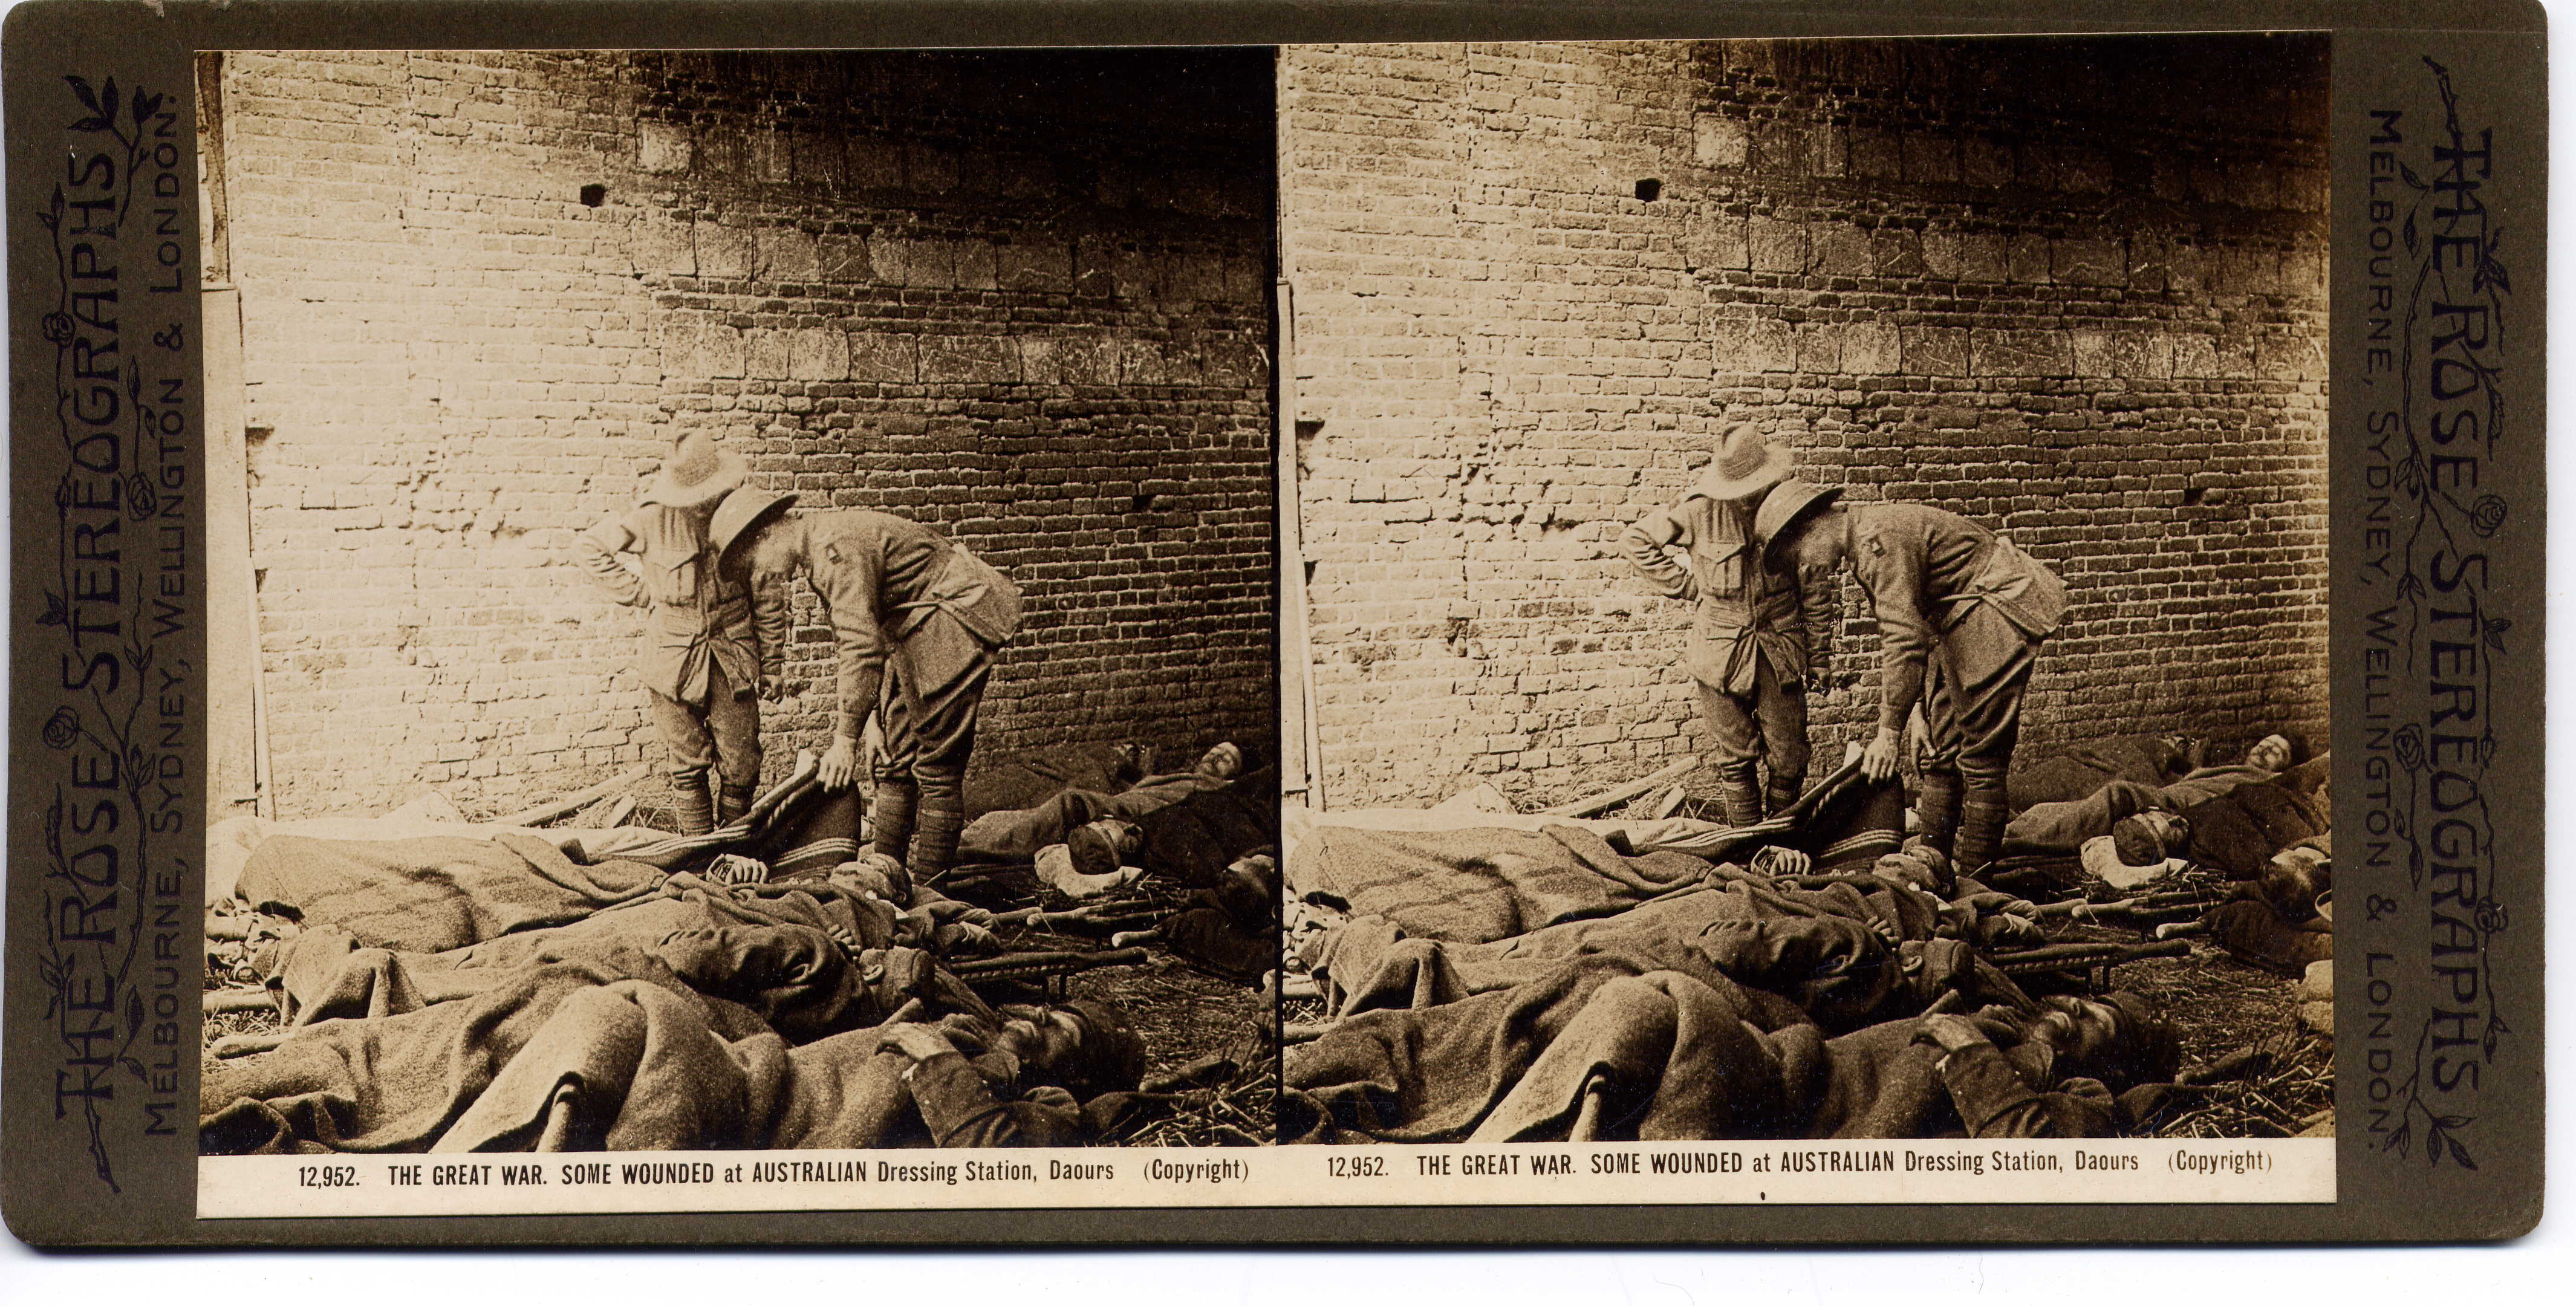 THE GREAT WAR. SOME WOUNDED at AUSTRALIAN Dressing Station, Daours.